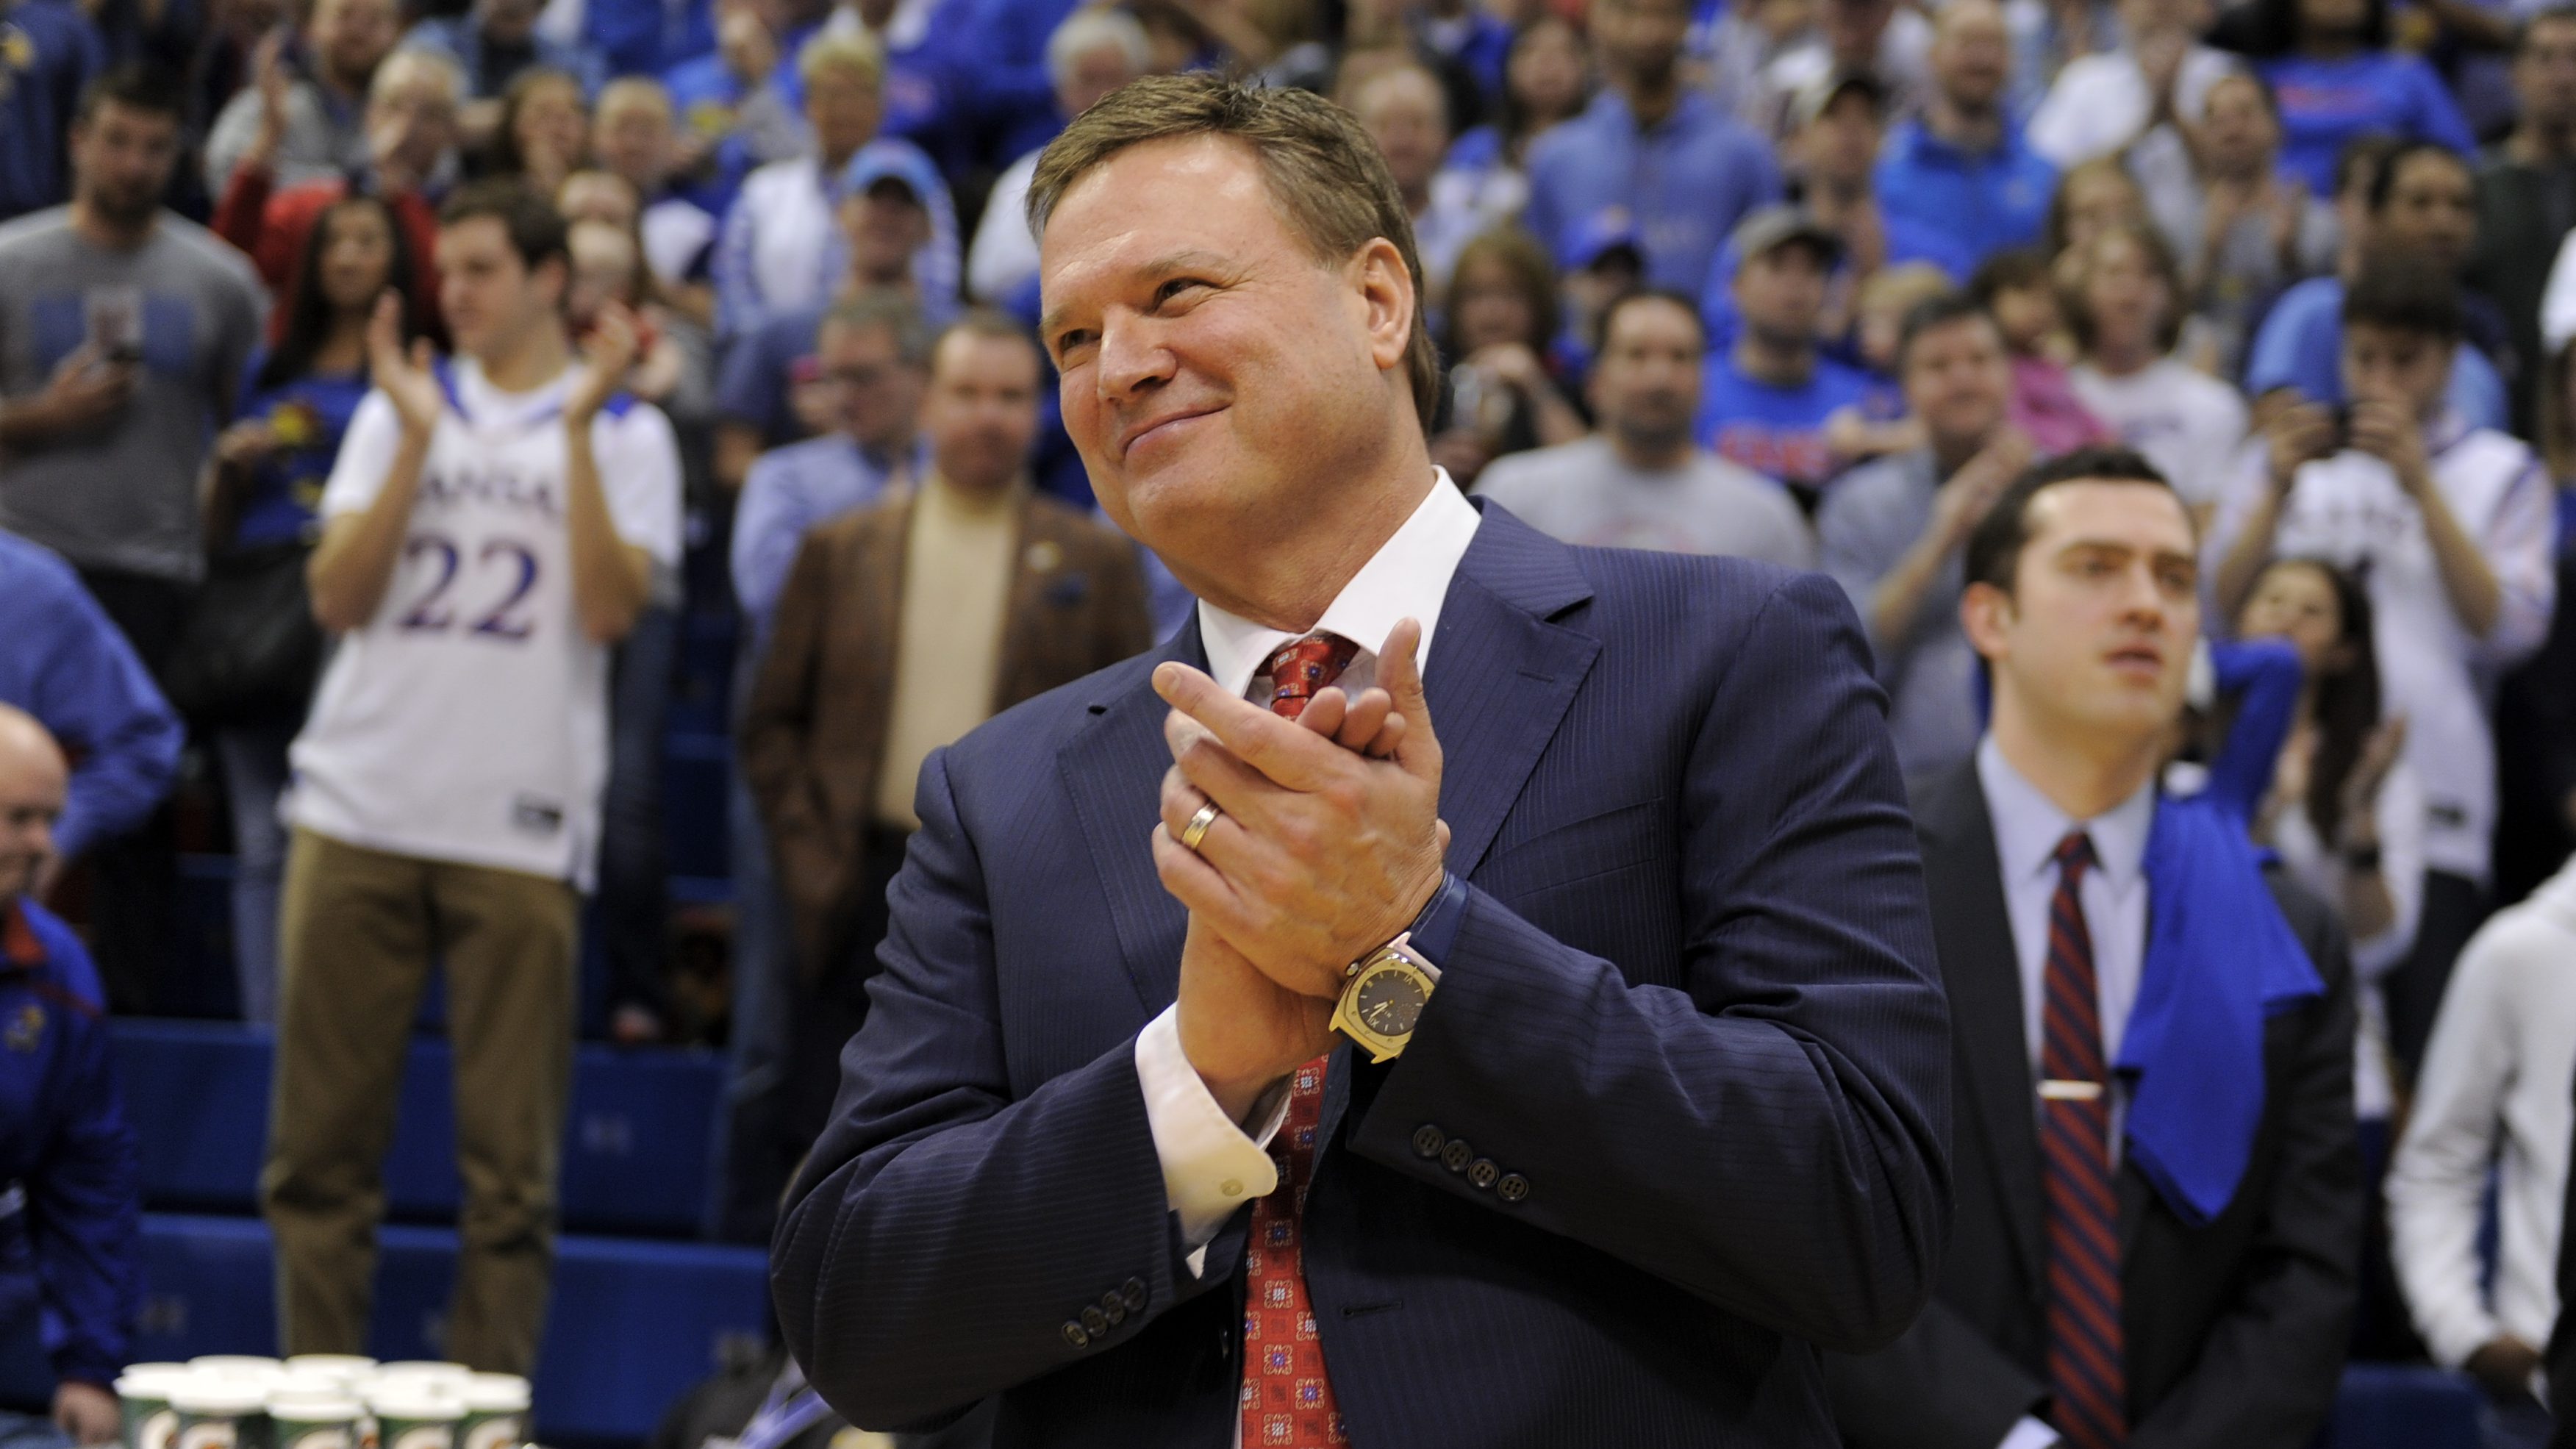 LAWRENCE, KS - FEBRUARY 27: Bill Self head coach of the Kansas Jayhawks claps for his team as they celebrate winning the Big 12 Conference Championship after they defeated Texas Tech Red Raiders 67-58 at Allen Fieldhouse on February 27, 2016 in Lawrence, Kansas. With the win, Kansas clinched its 12th straight conference championship. (Photo by Ed Zurga/Getty Images)